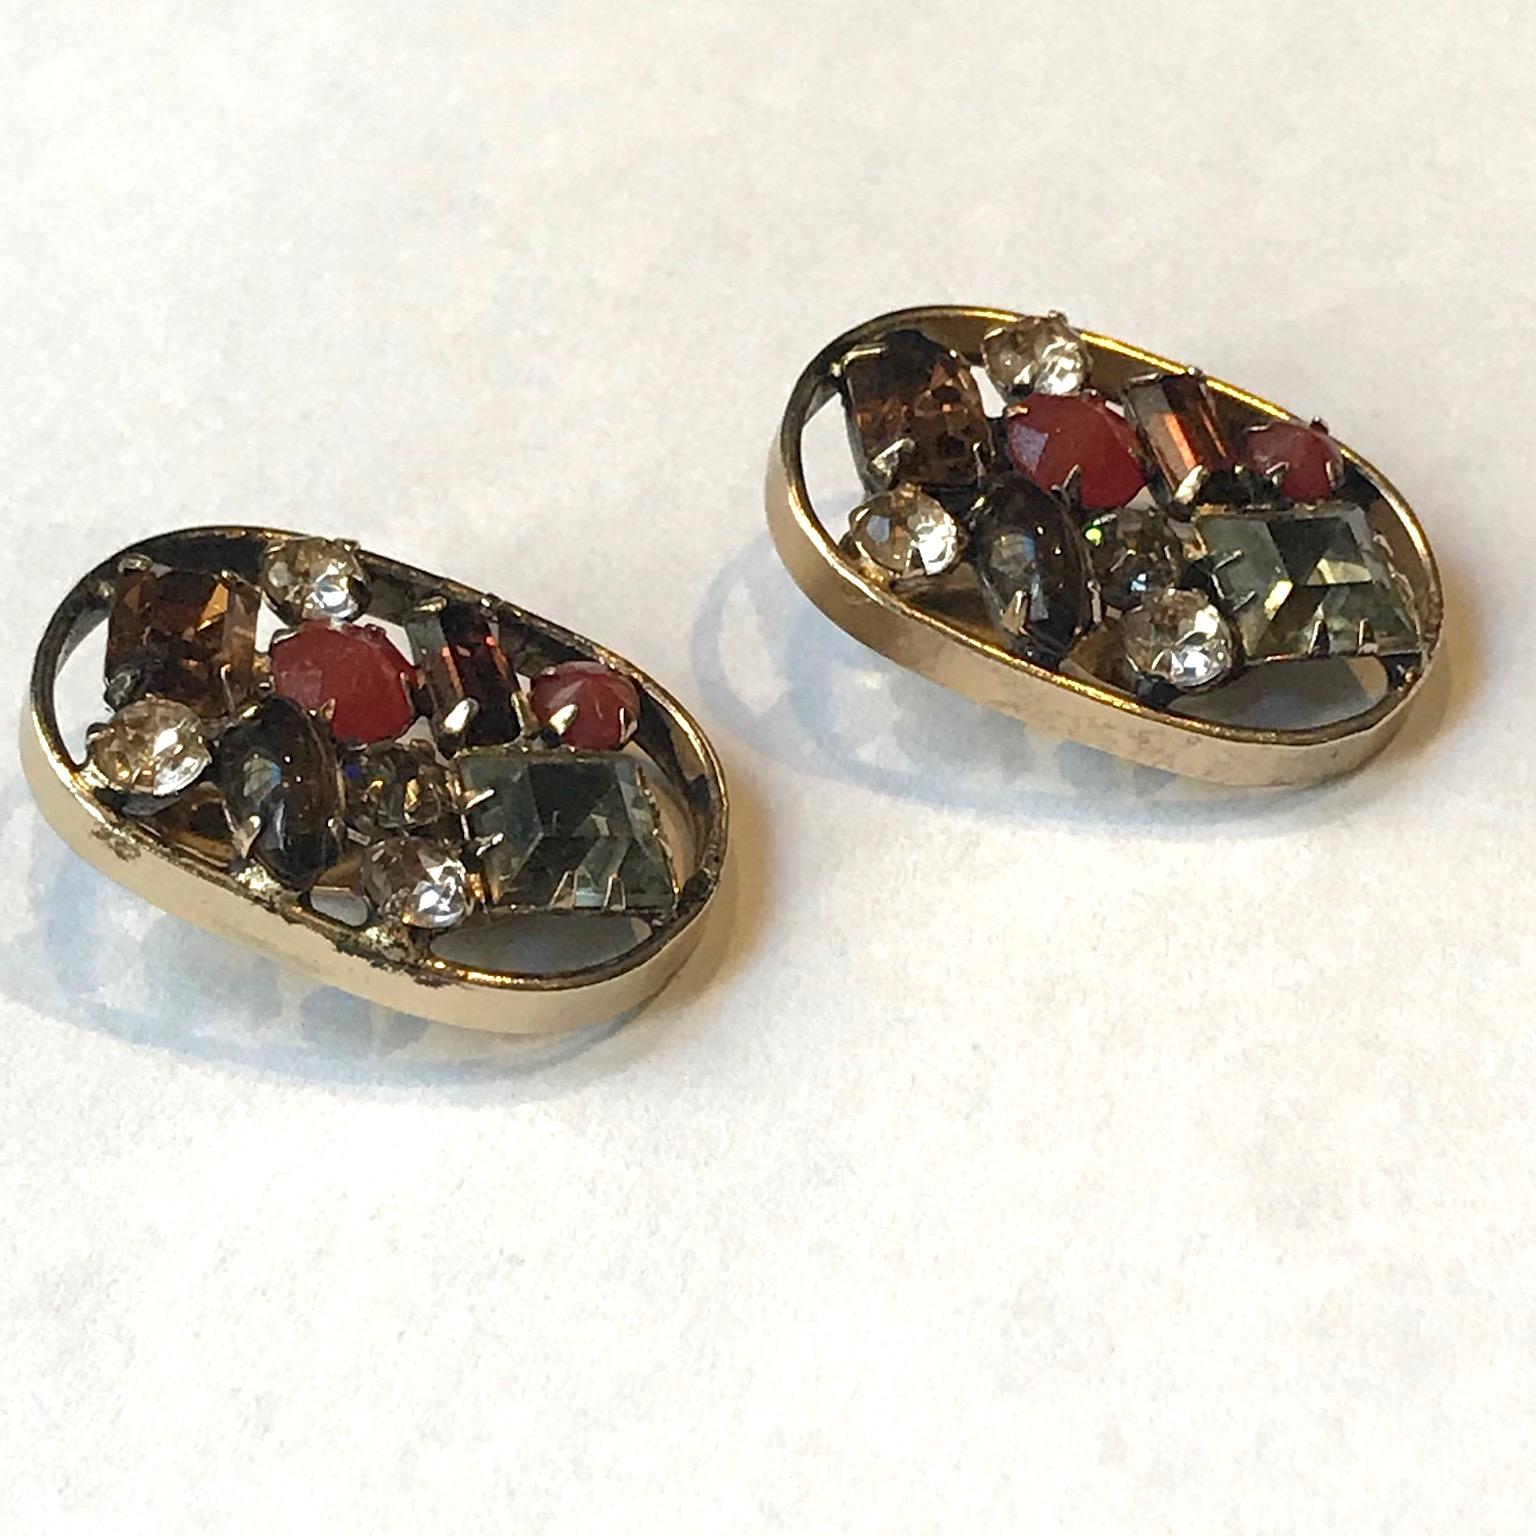 Schreiner 1950s Antique Gold and Rhinestone Earrings 5